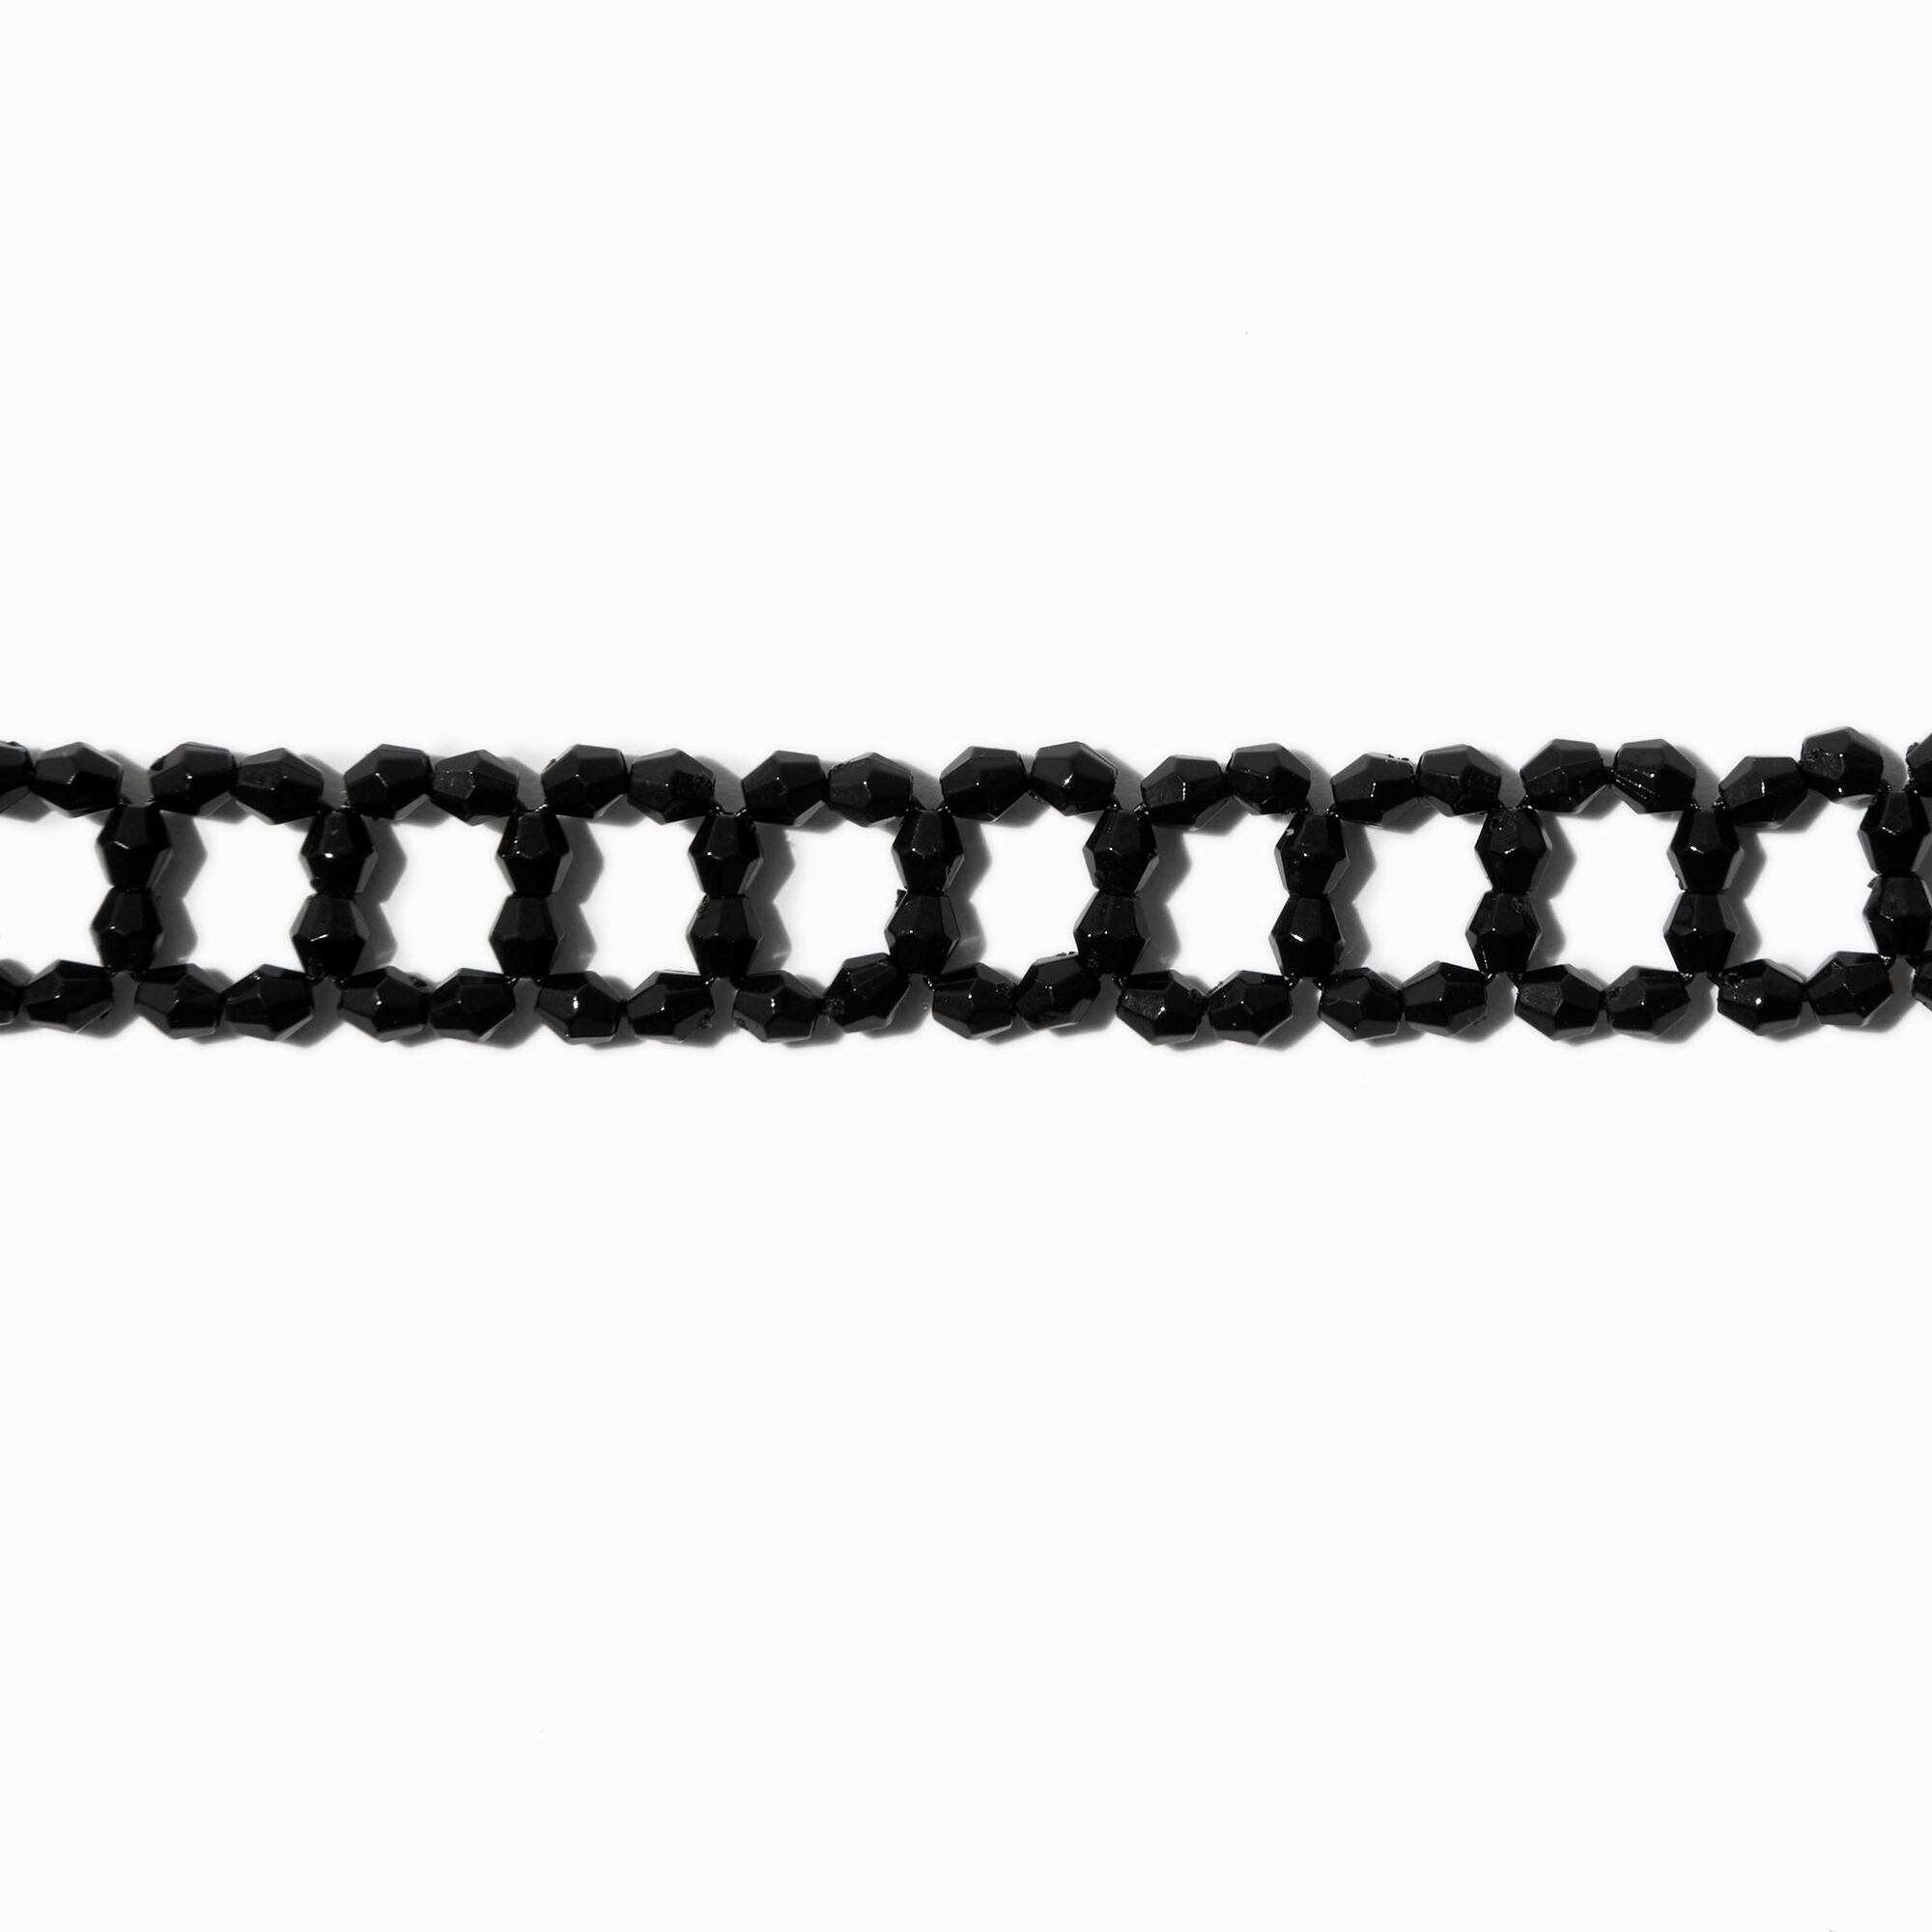 View Claires Beaded Choker Necklace Black information